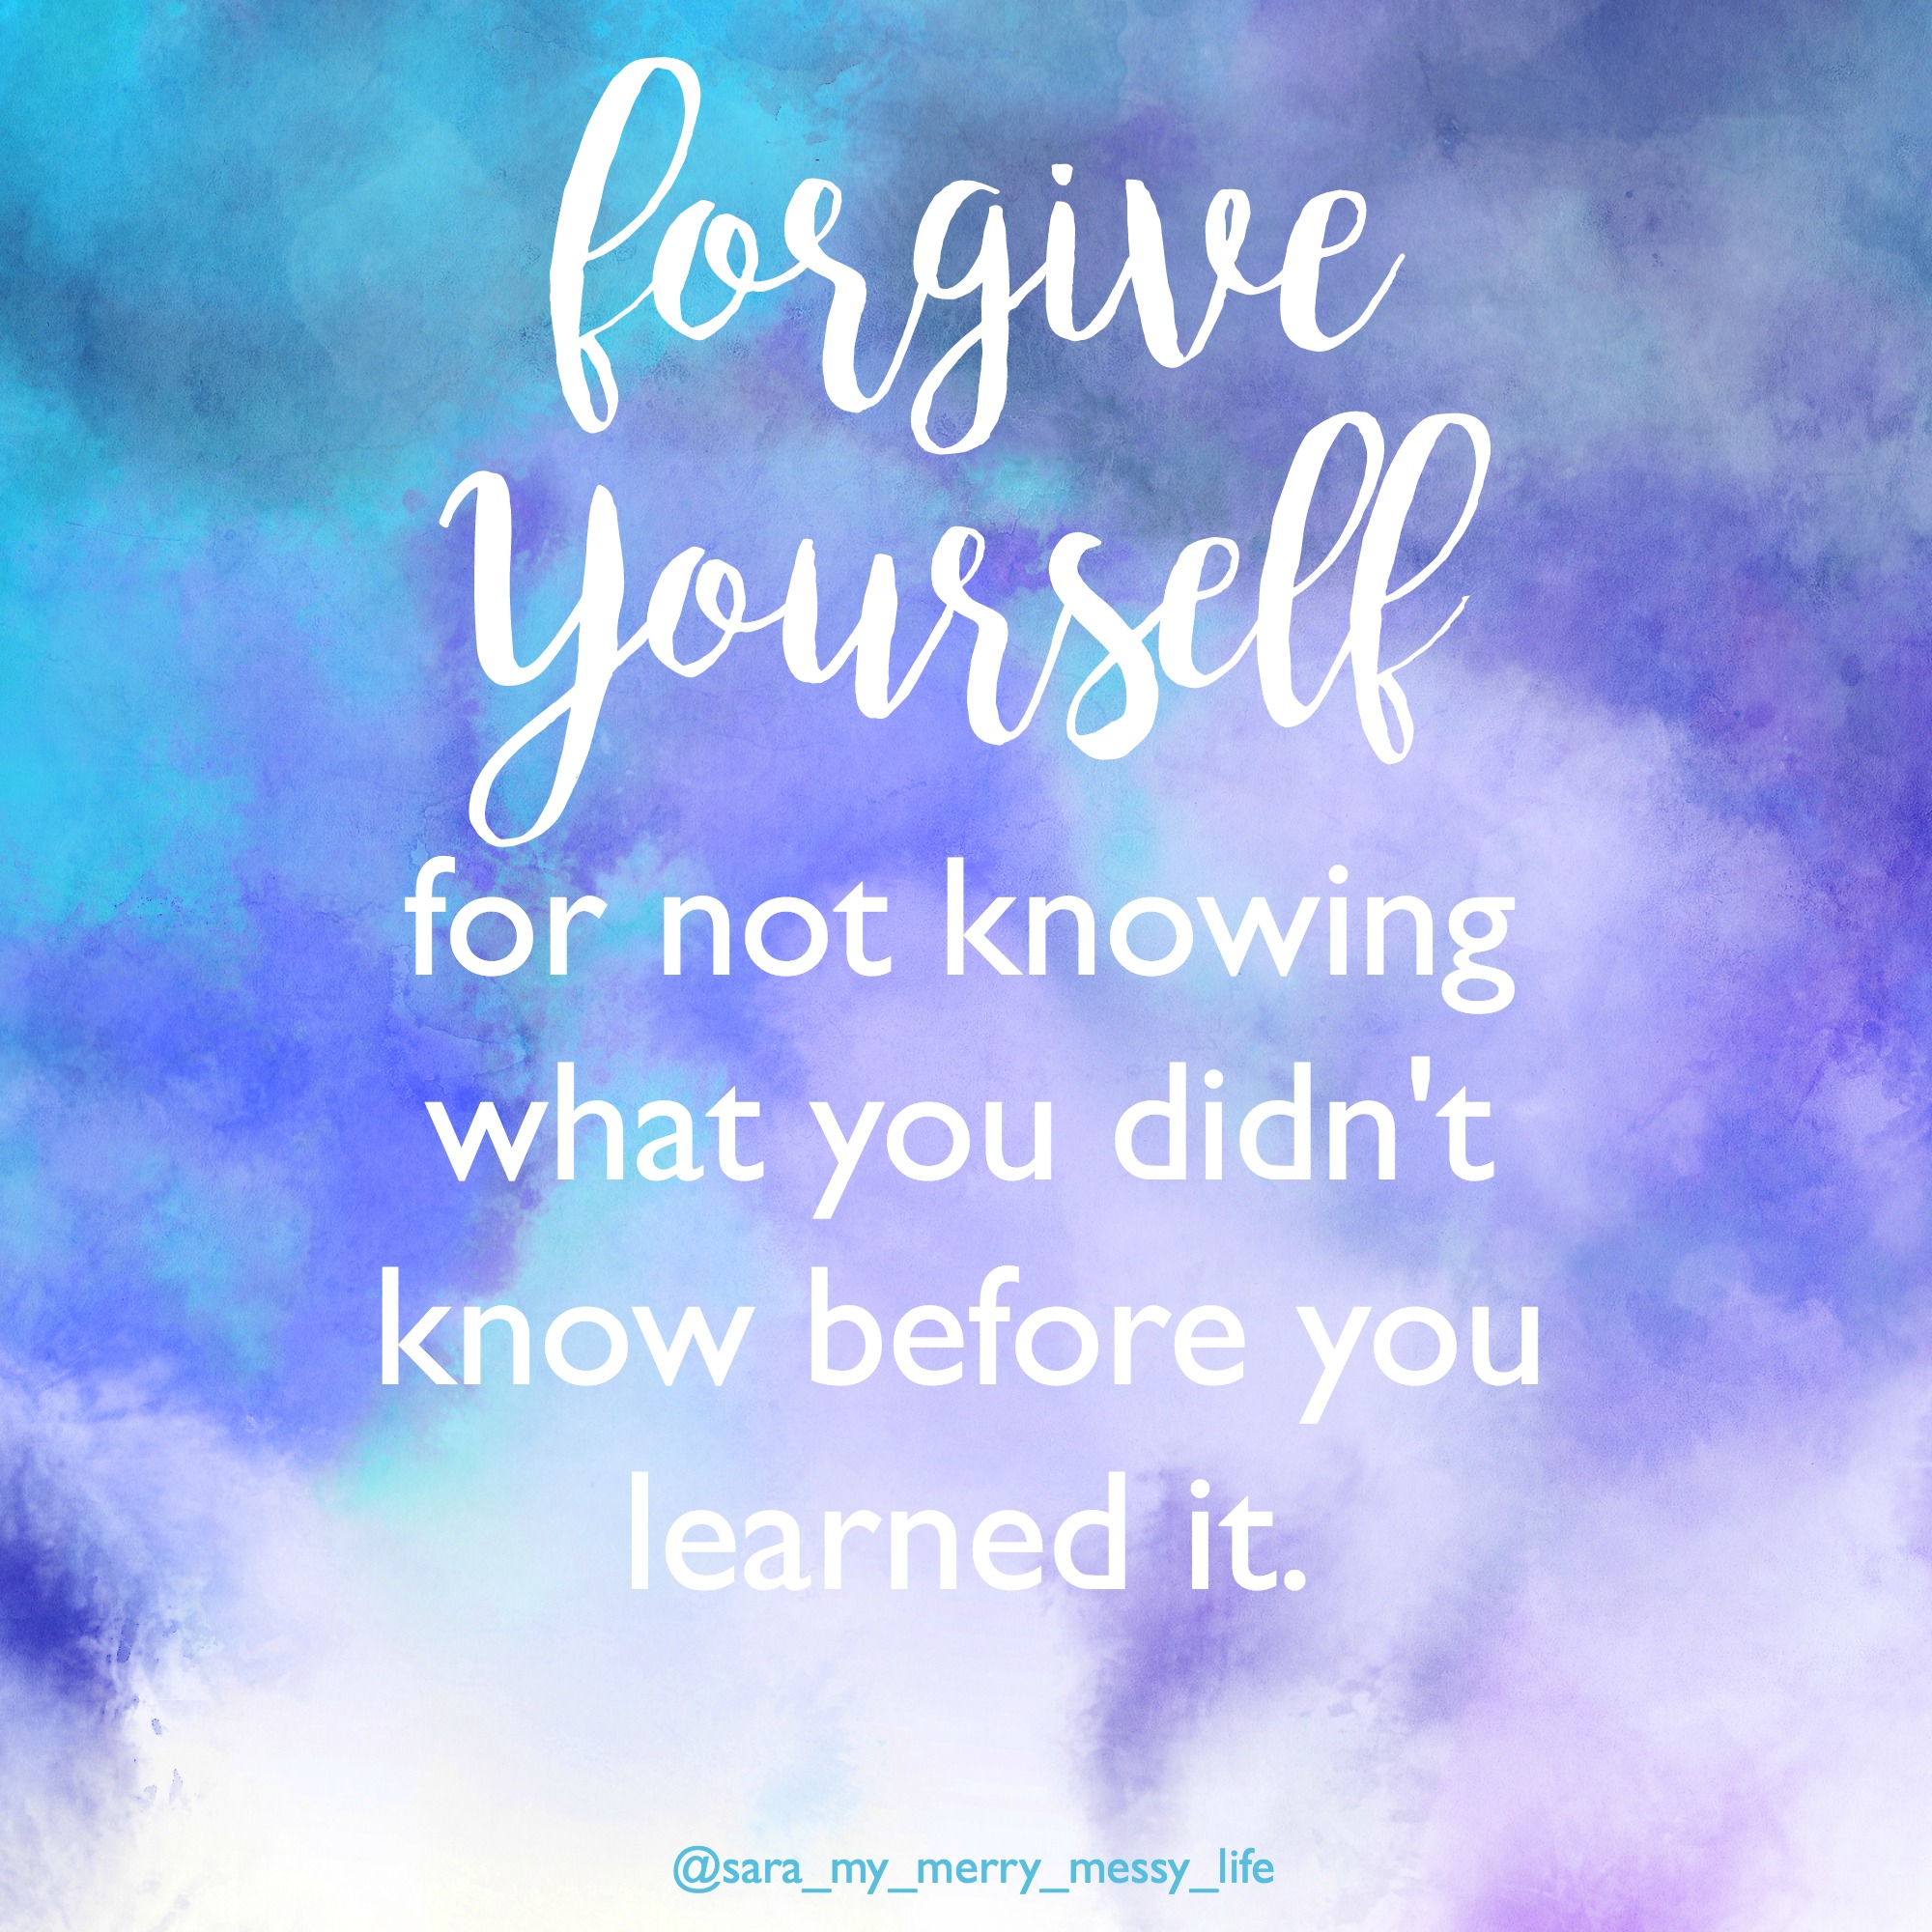 Forgive yourself for not knowing What You didn't know before you knew it.